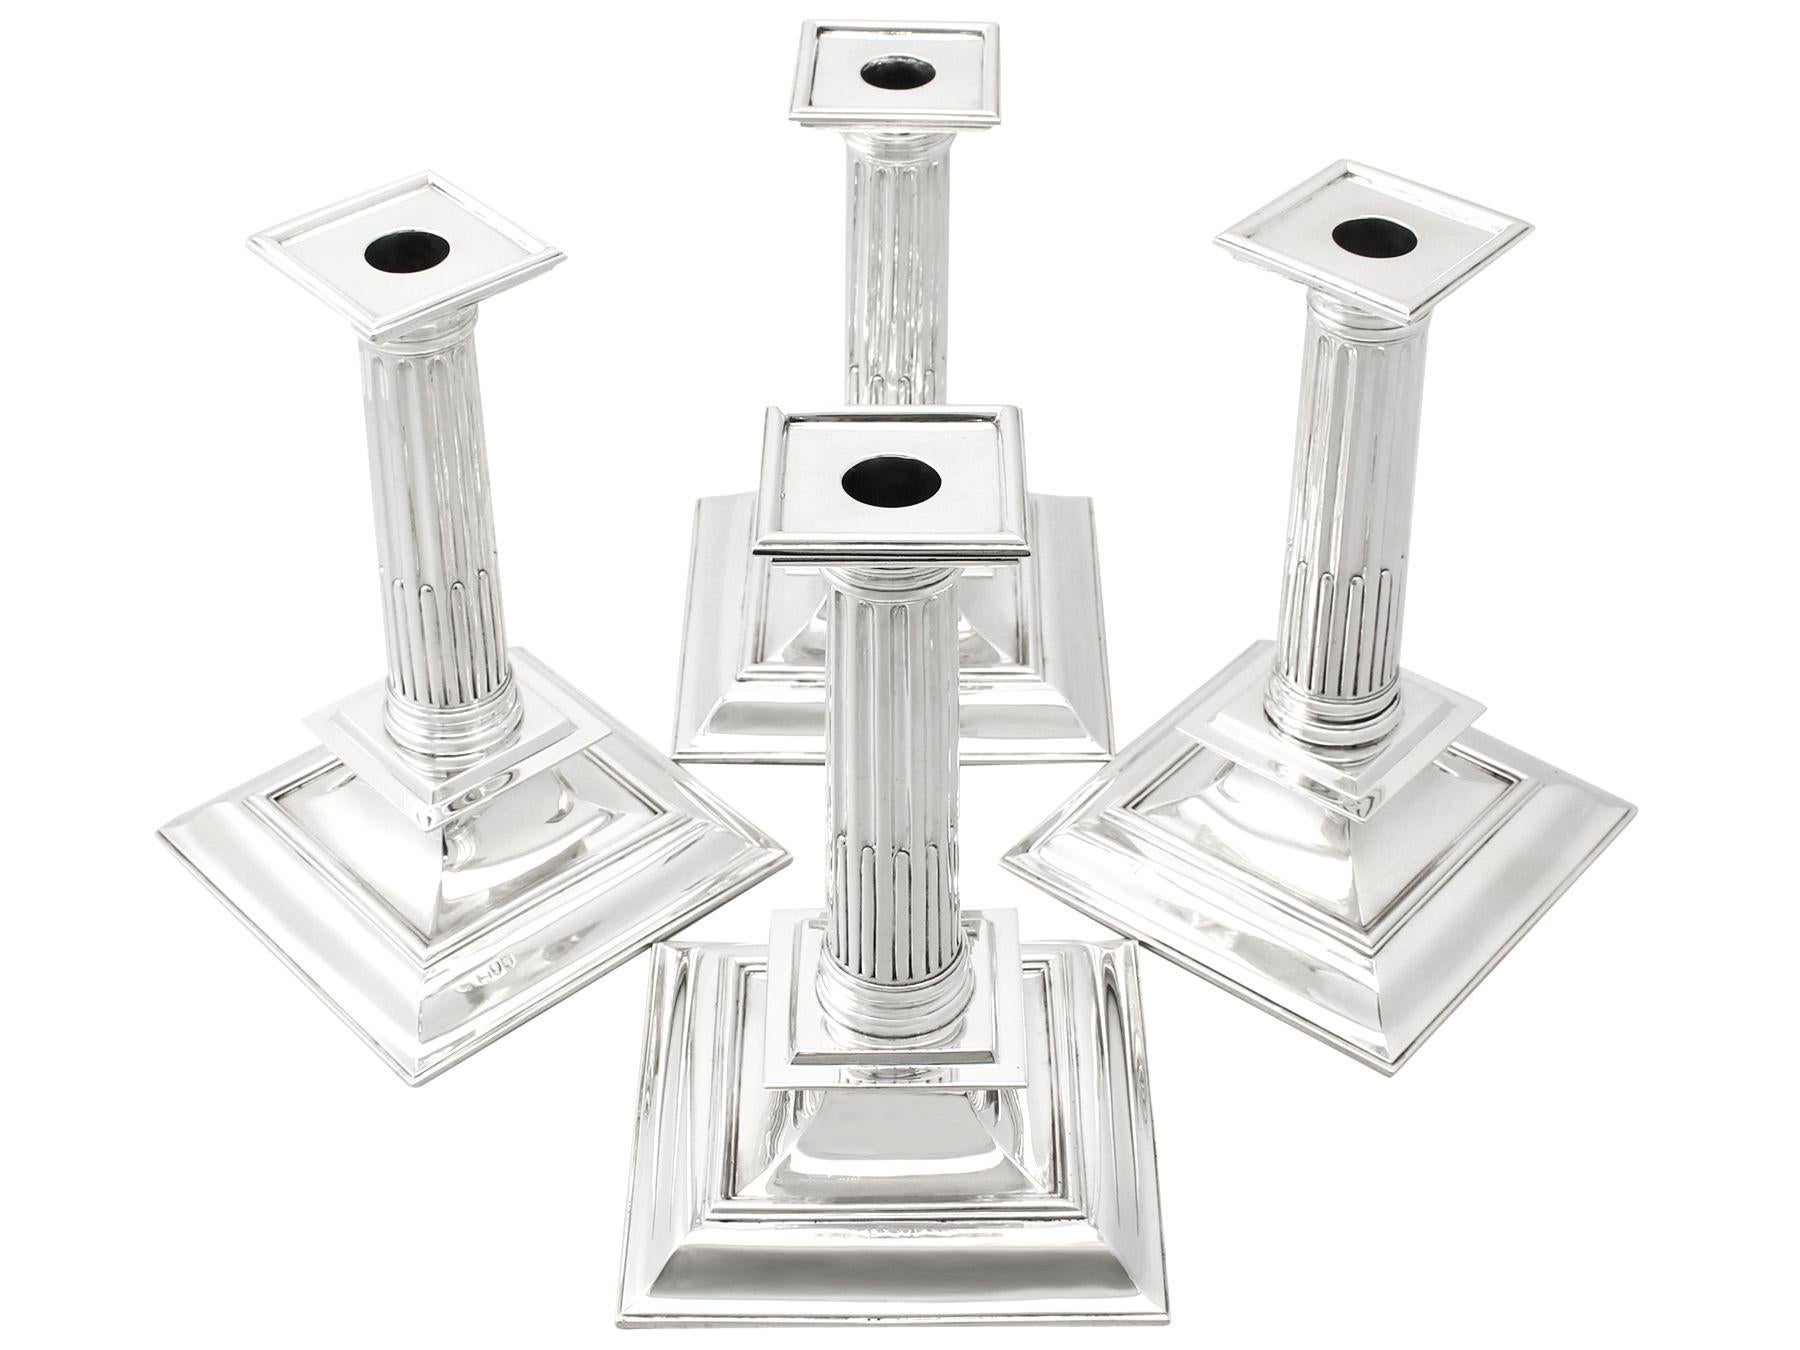 A magnificent, fine and impressive, composite set of four Victorian English sterling silver candlesticks in the Charles II style; an addition to our Victorian silverware collection.

These magnificent antique Victorian candlesticks have been crafted